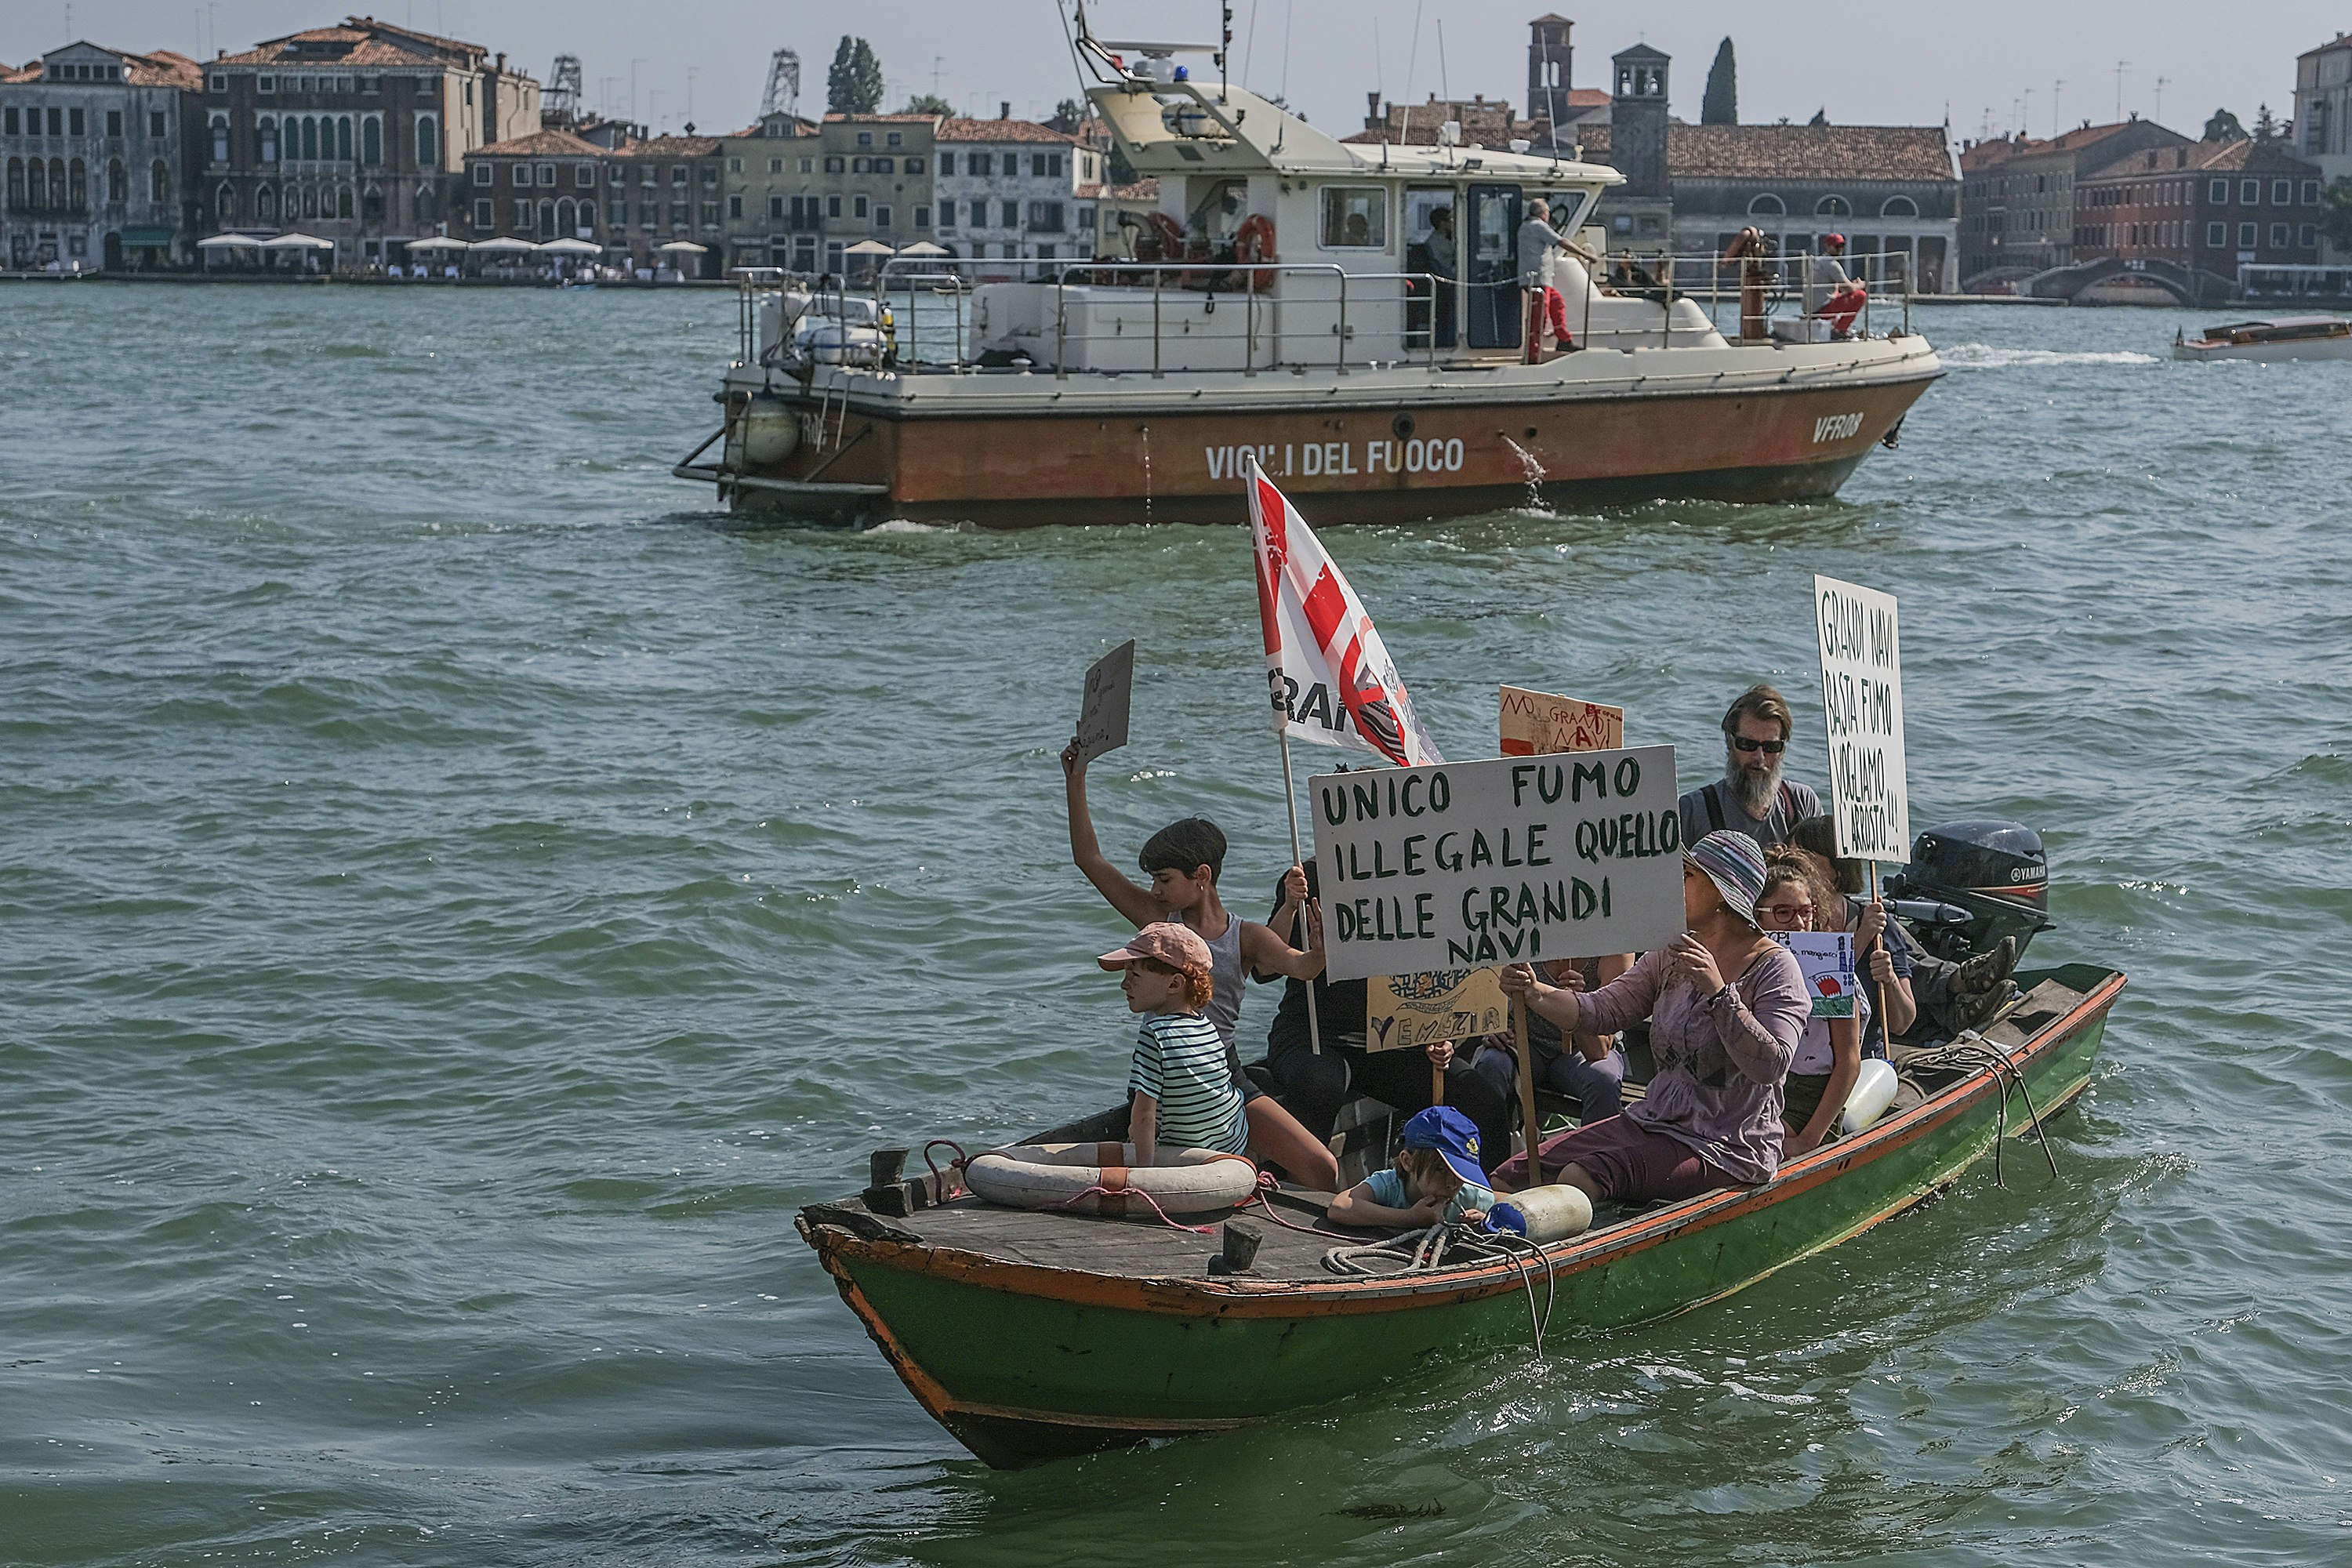 Venetians in kayaks protest against cruise ships after accidenton June 08, 2019 in Venice, Italy. Following the incident of the cruise ship Opera, of the company MSC, which occurred on 02 June 2019, the No Big Ships committee organized a protest march in Venice asking for the passage of large ships near San Marco to be banned. 